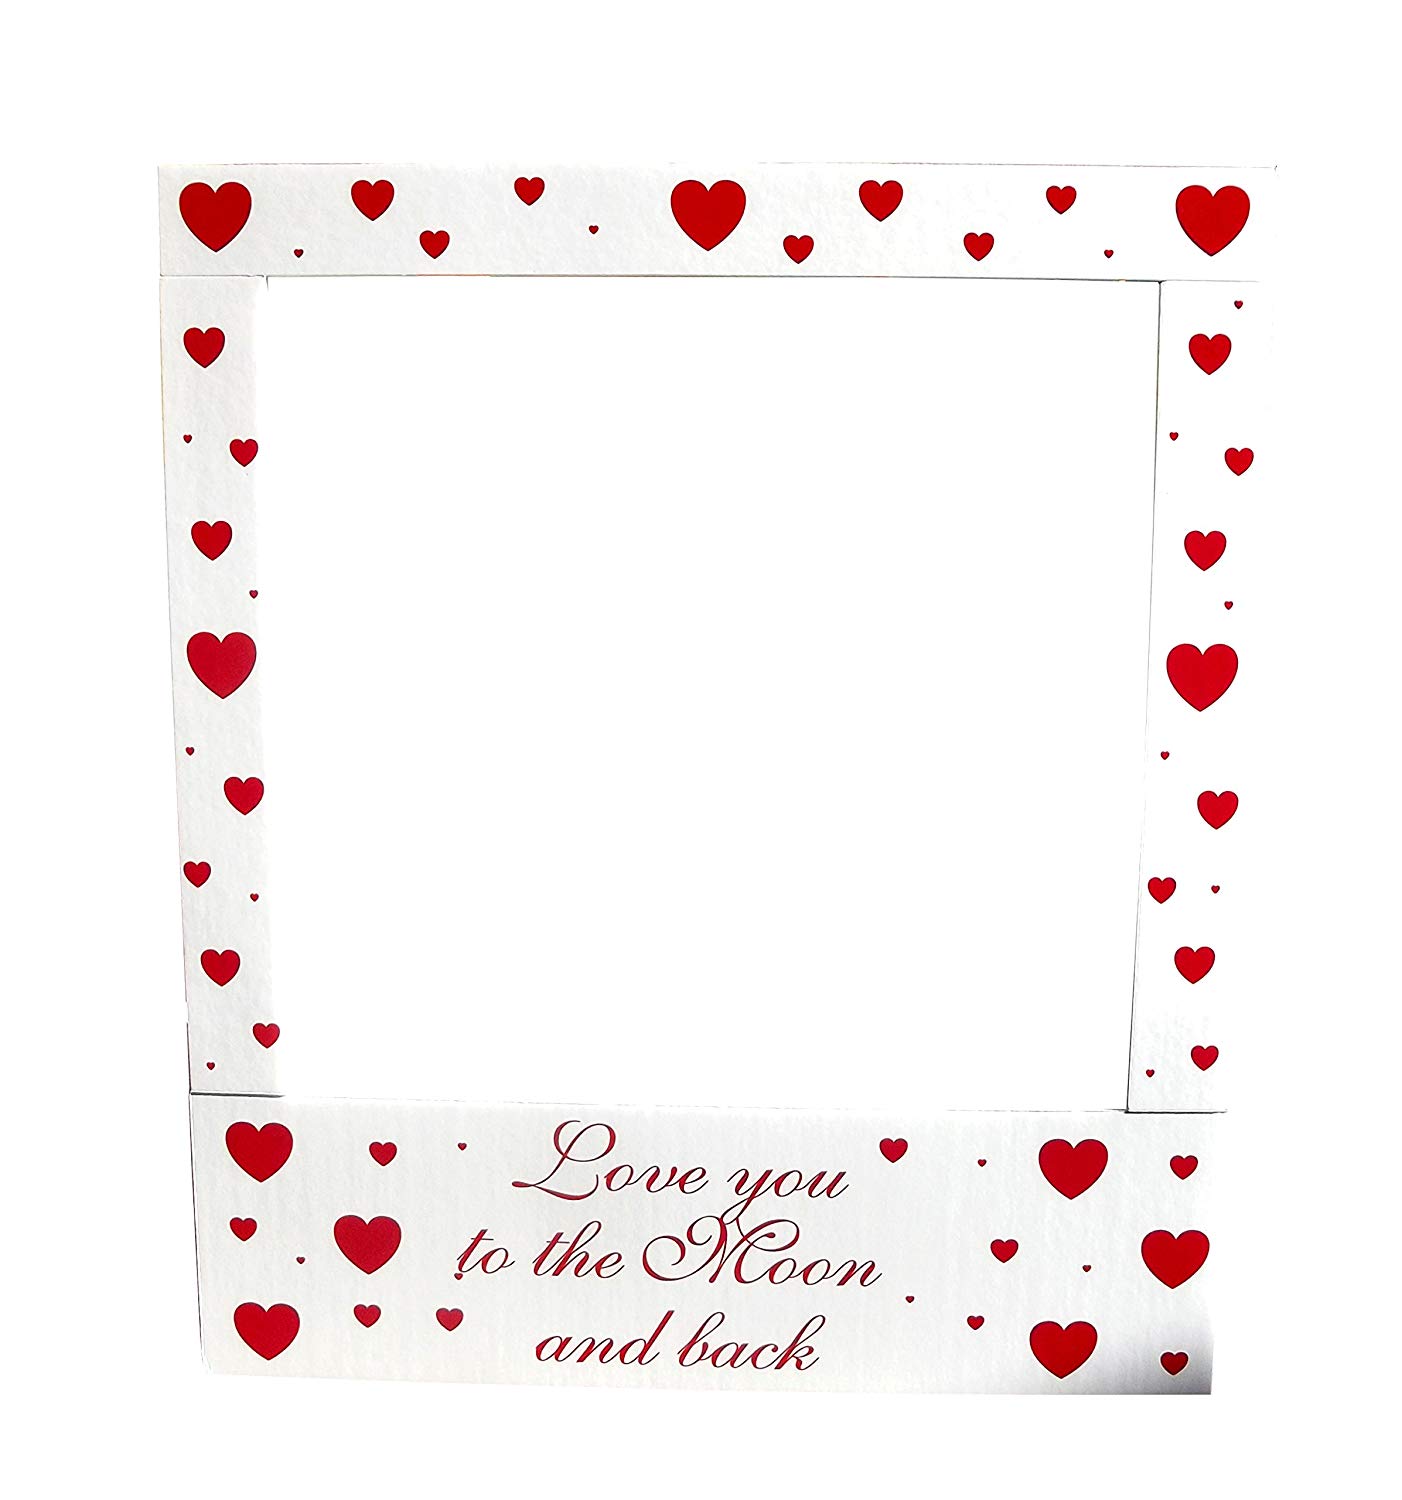 Aahs Engraving Valentine's Day Party Frame Photo Prop, 35 X 30 inches ("Love You to the Moon and Back") - image 2 of 3